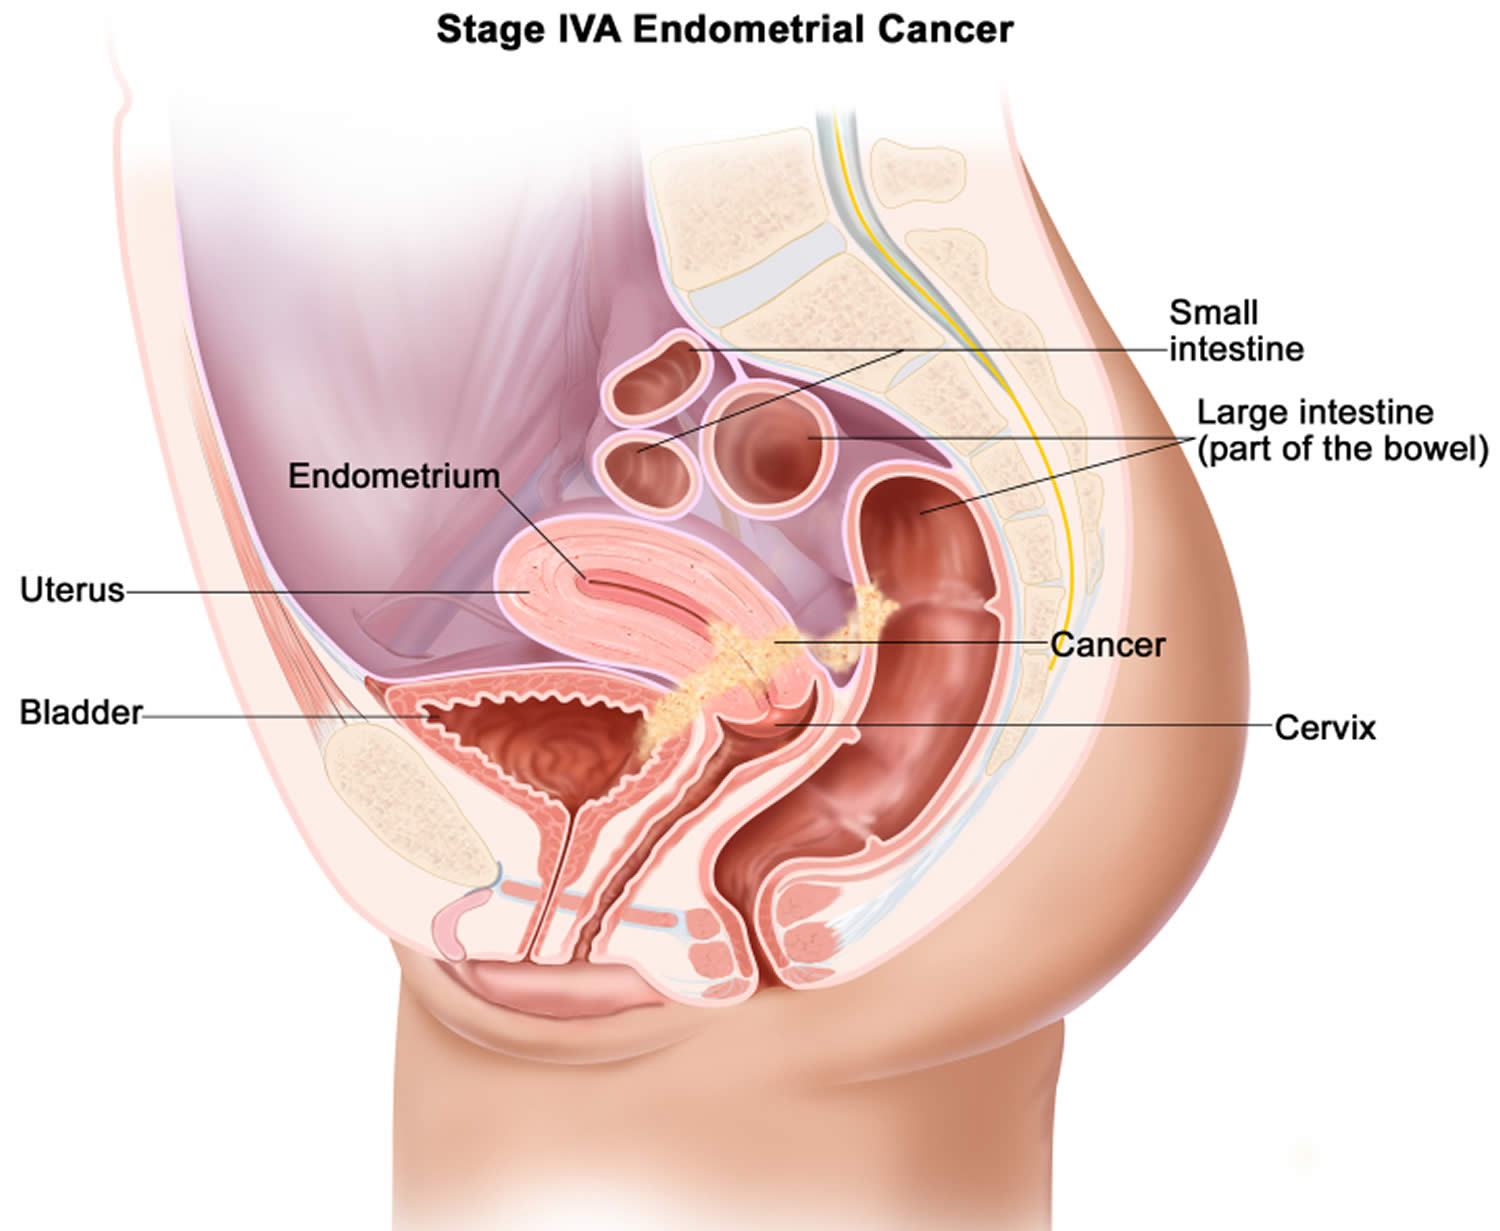 Stage 4A endometrial cancer